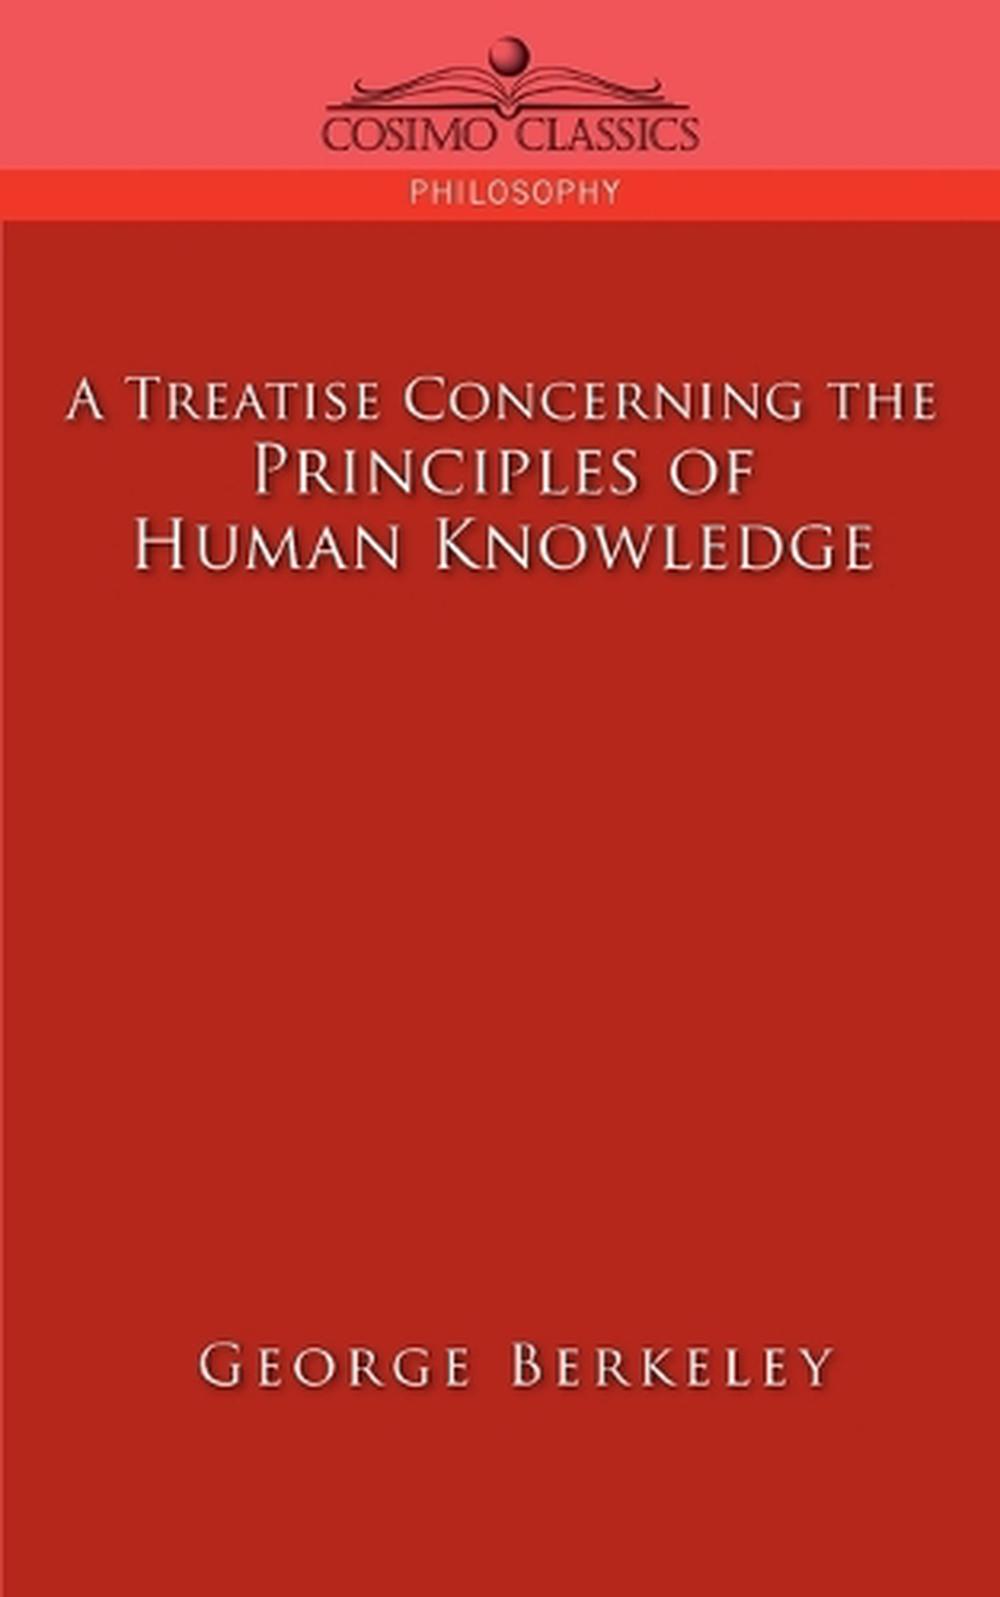 george berkeley a treatise concerning the principles of human knowledge